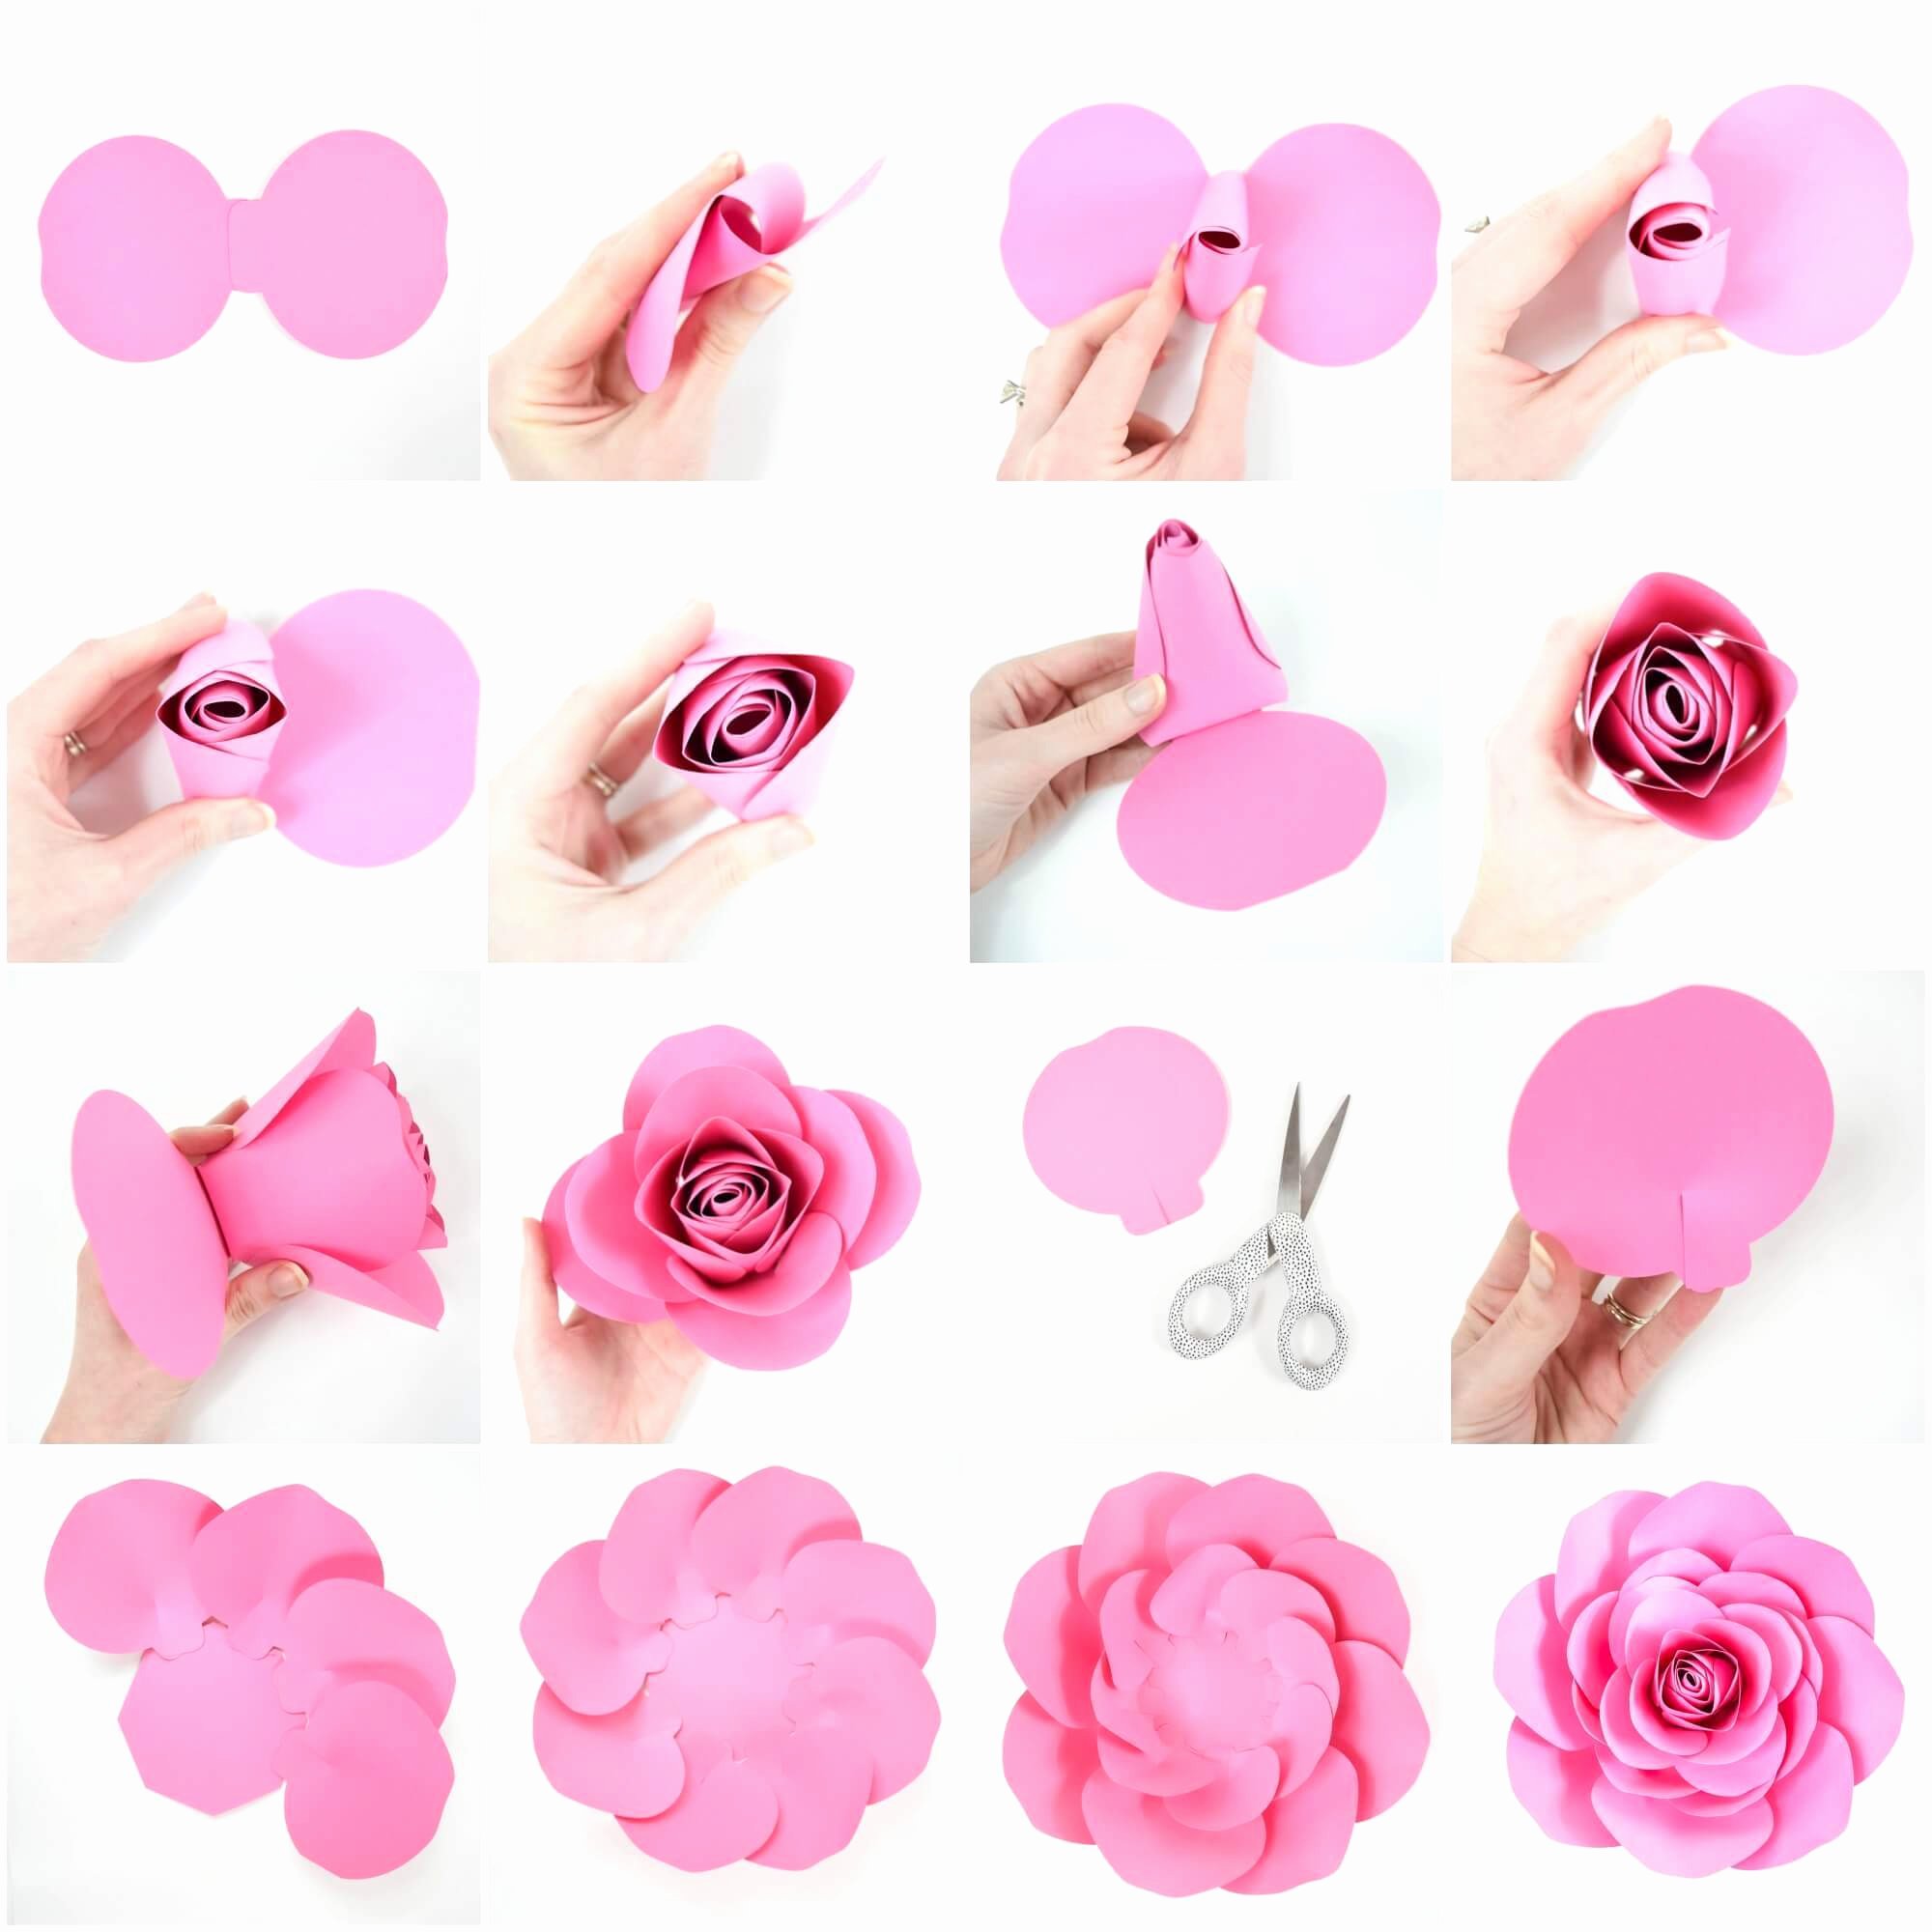 Paper Flower Template Free Awesome Free Paper Rose Template Diy Camellia Rose Tutorial